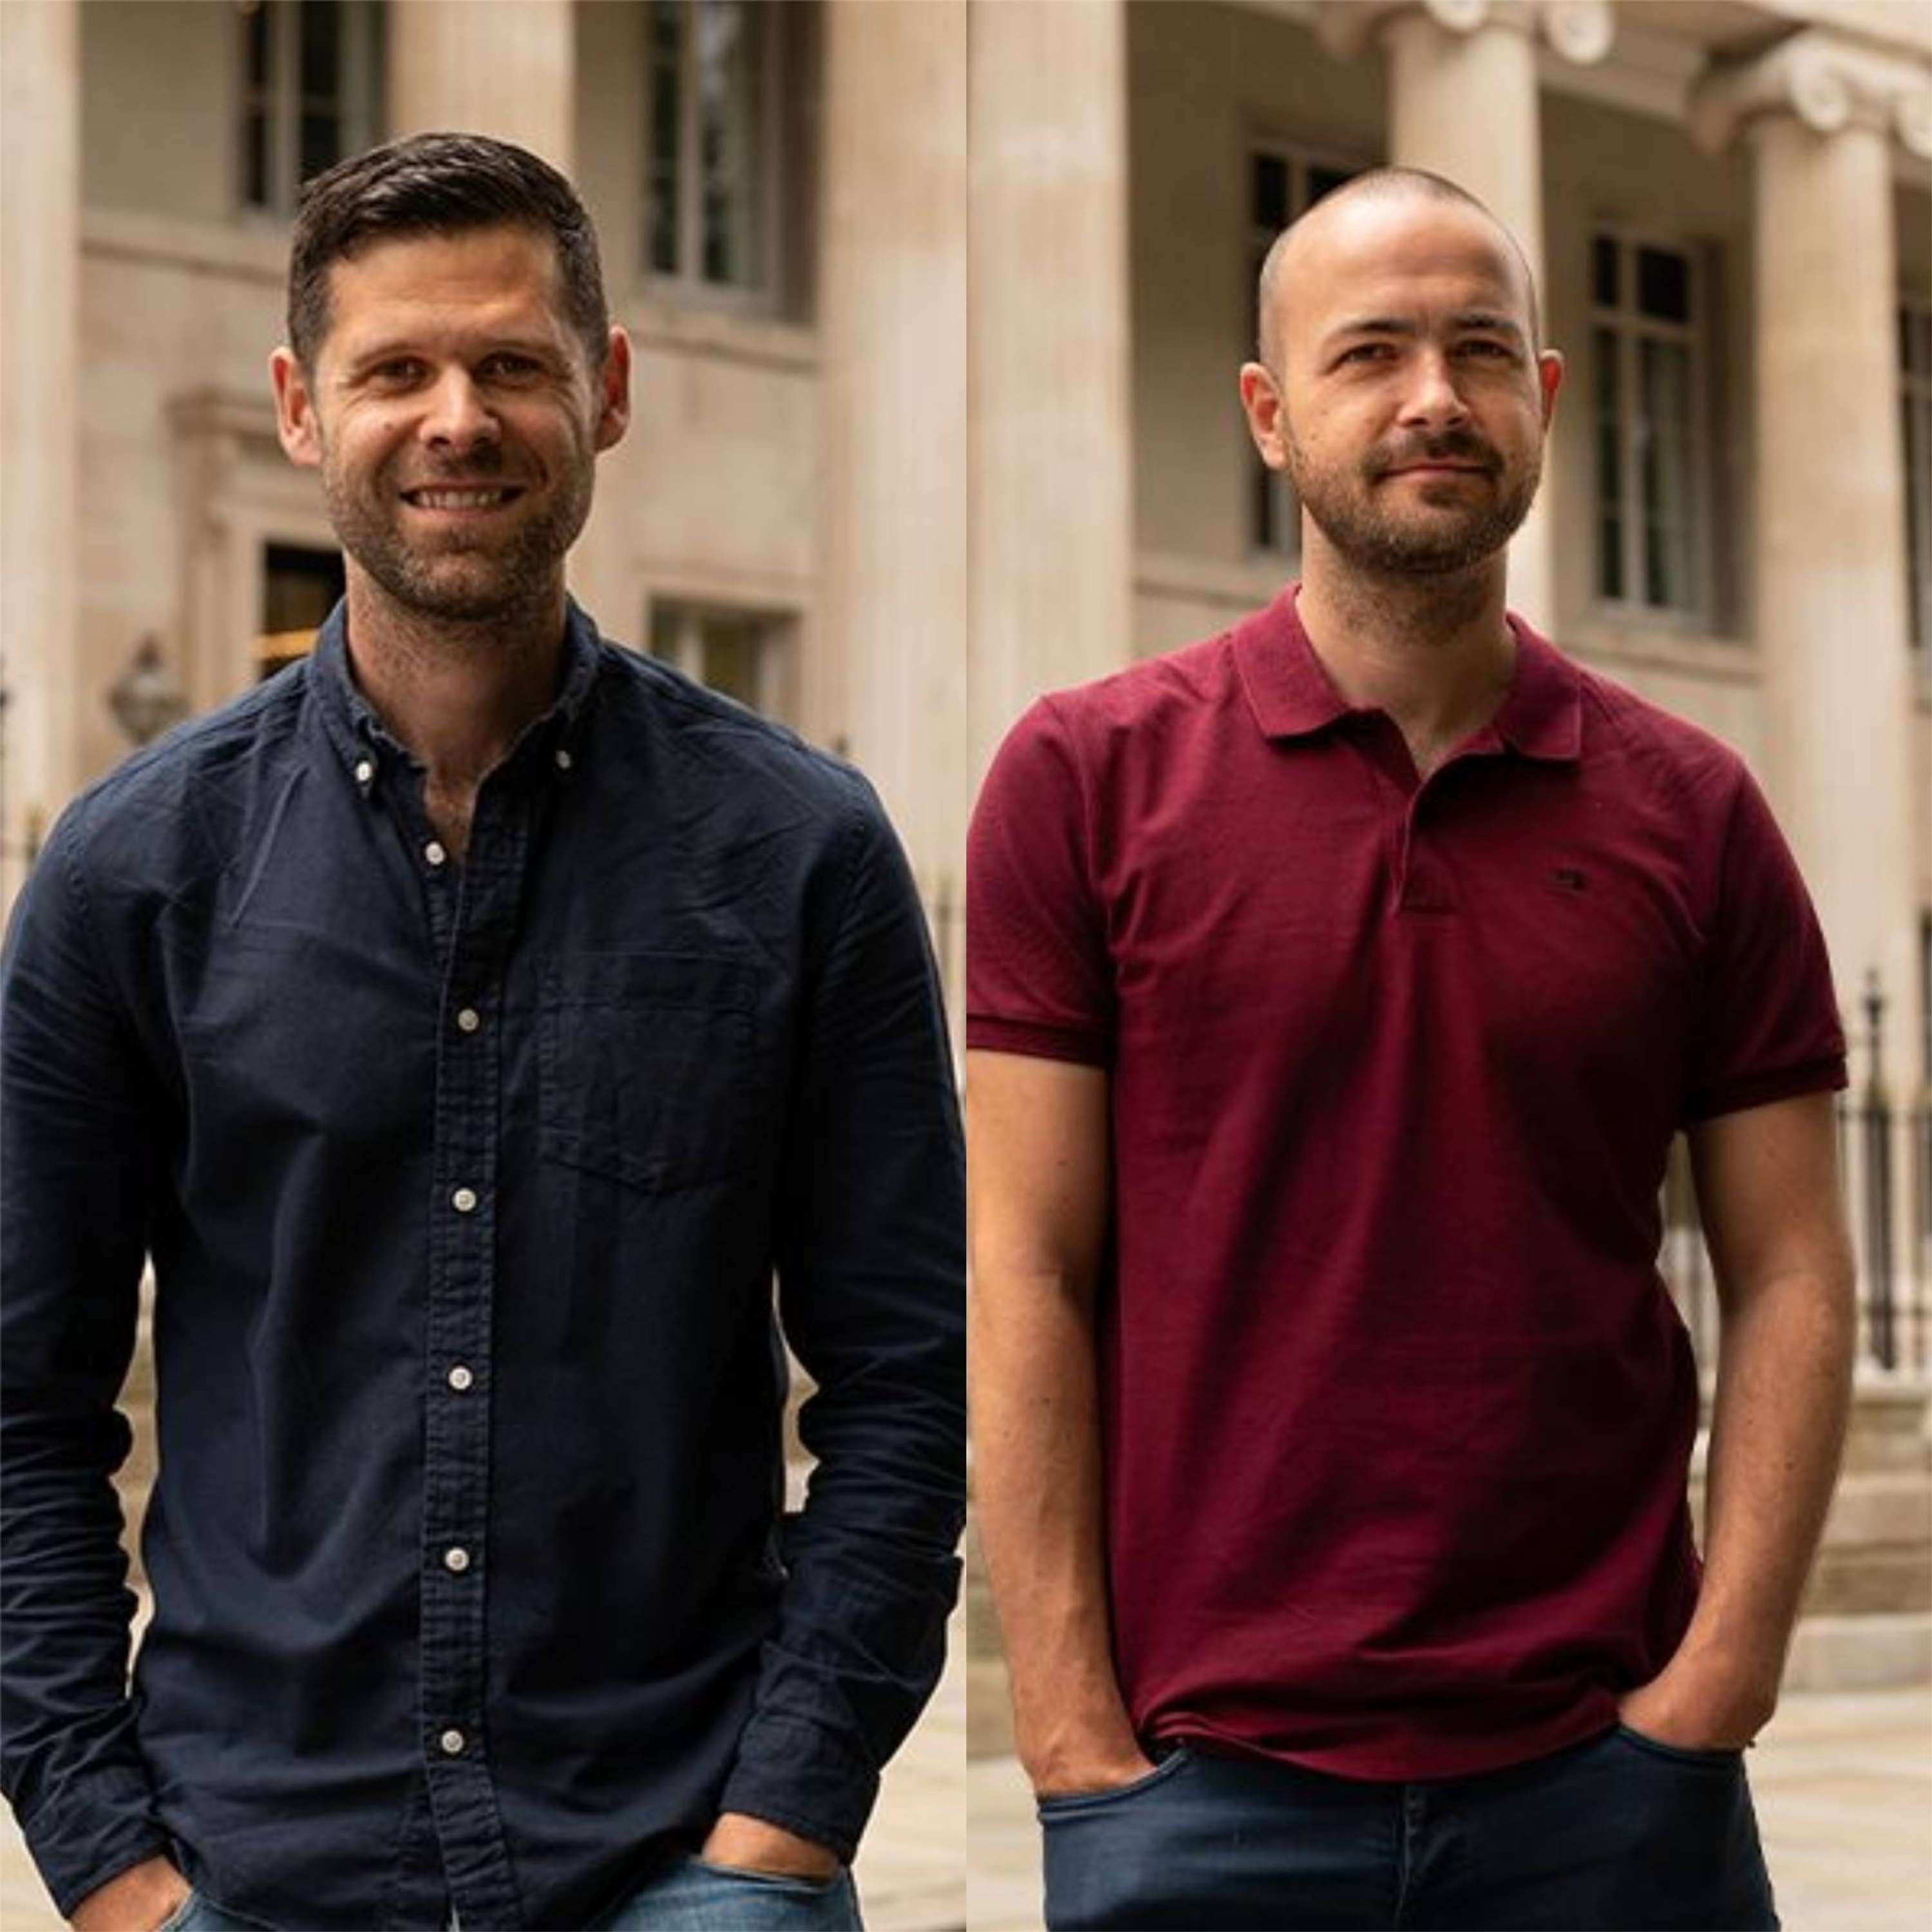 Helping launching and growing FinTechs smoothly with Alistair Cotton and Daniel Cronin, co-founders of Integrated Finance (UK)